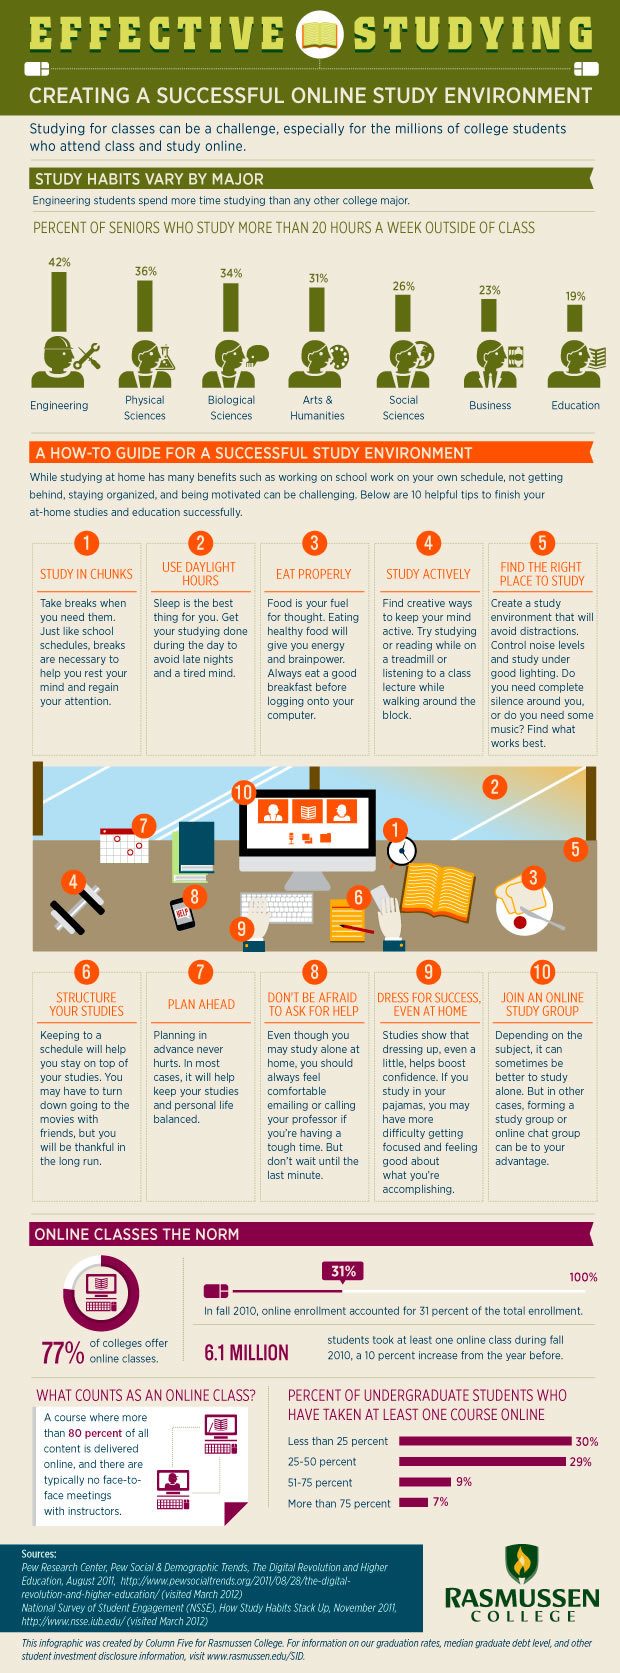 How to Create a Successful Online Study Environment Infographic